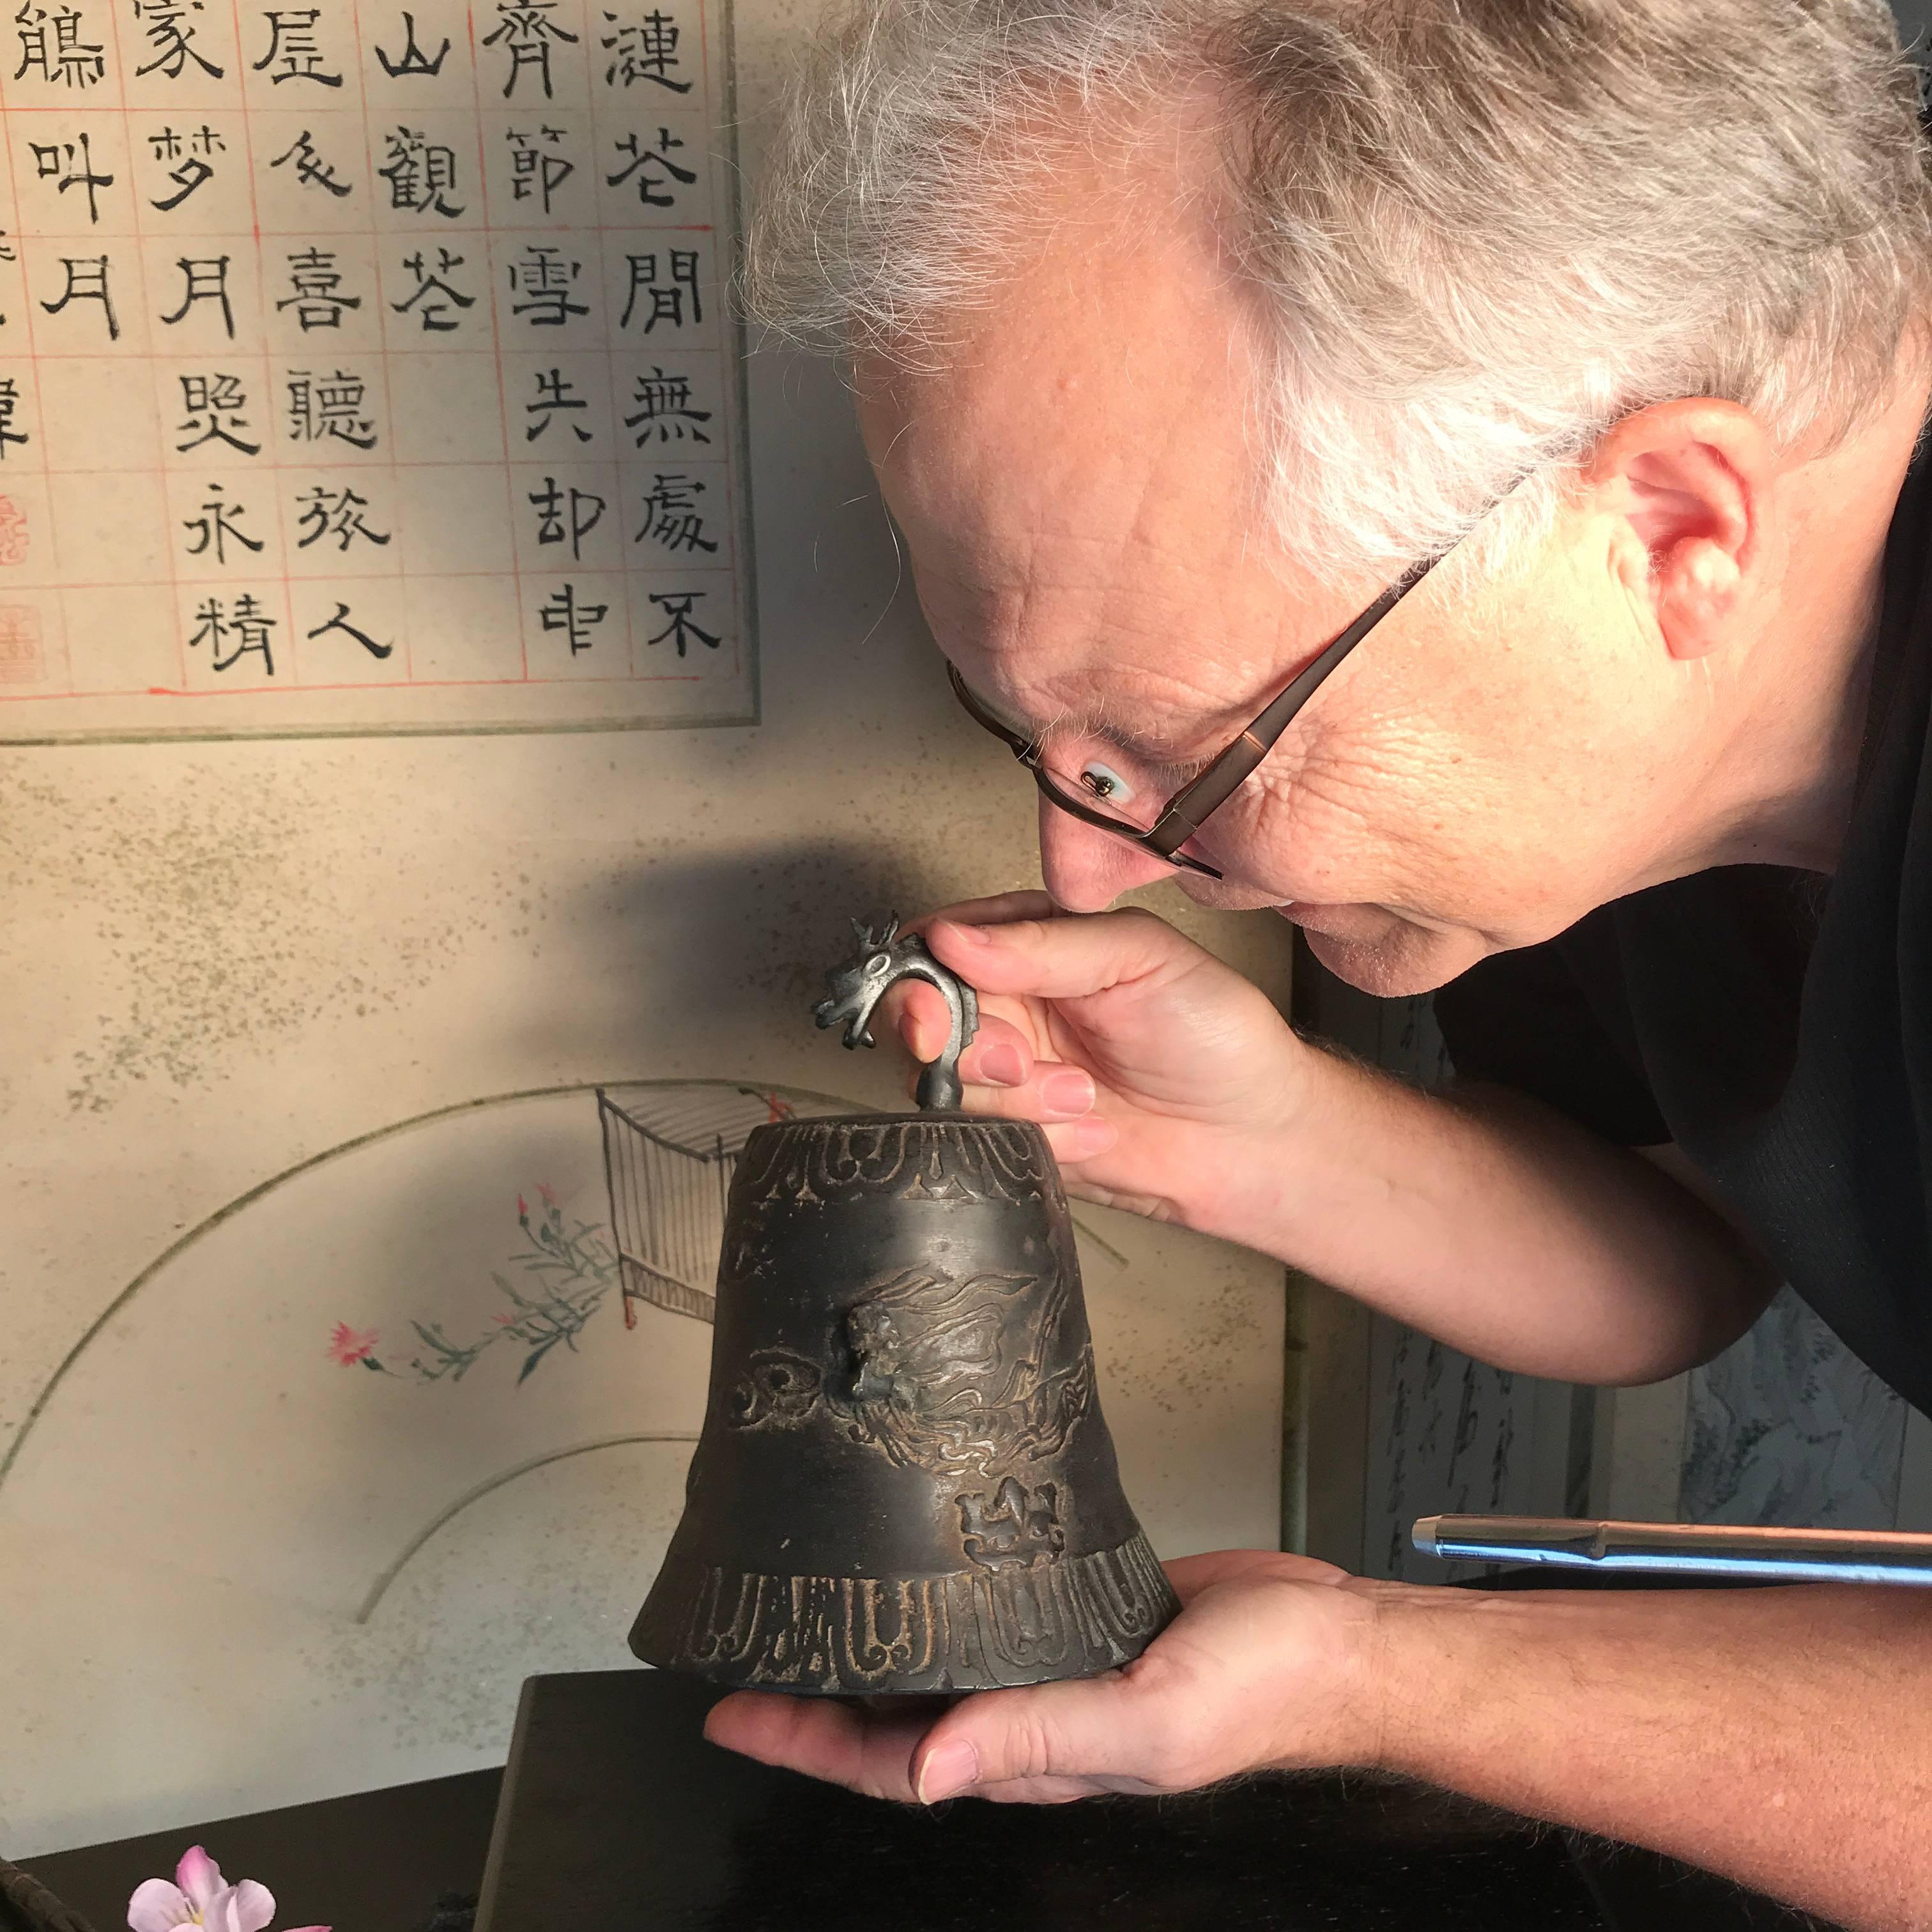 An unusual find from Kyoto during our recent acquisitions trip to Japan.

This superbly caste antique bronze fire bell size form came out of an old Kyoto collection. The unusual oval shaped base combined with It's dramatic surface 